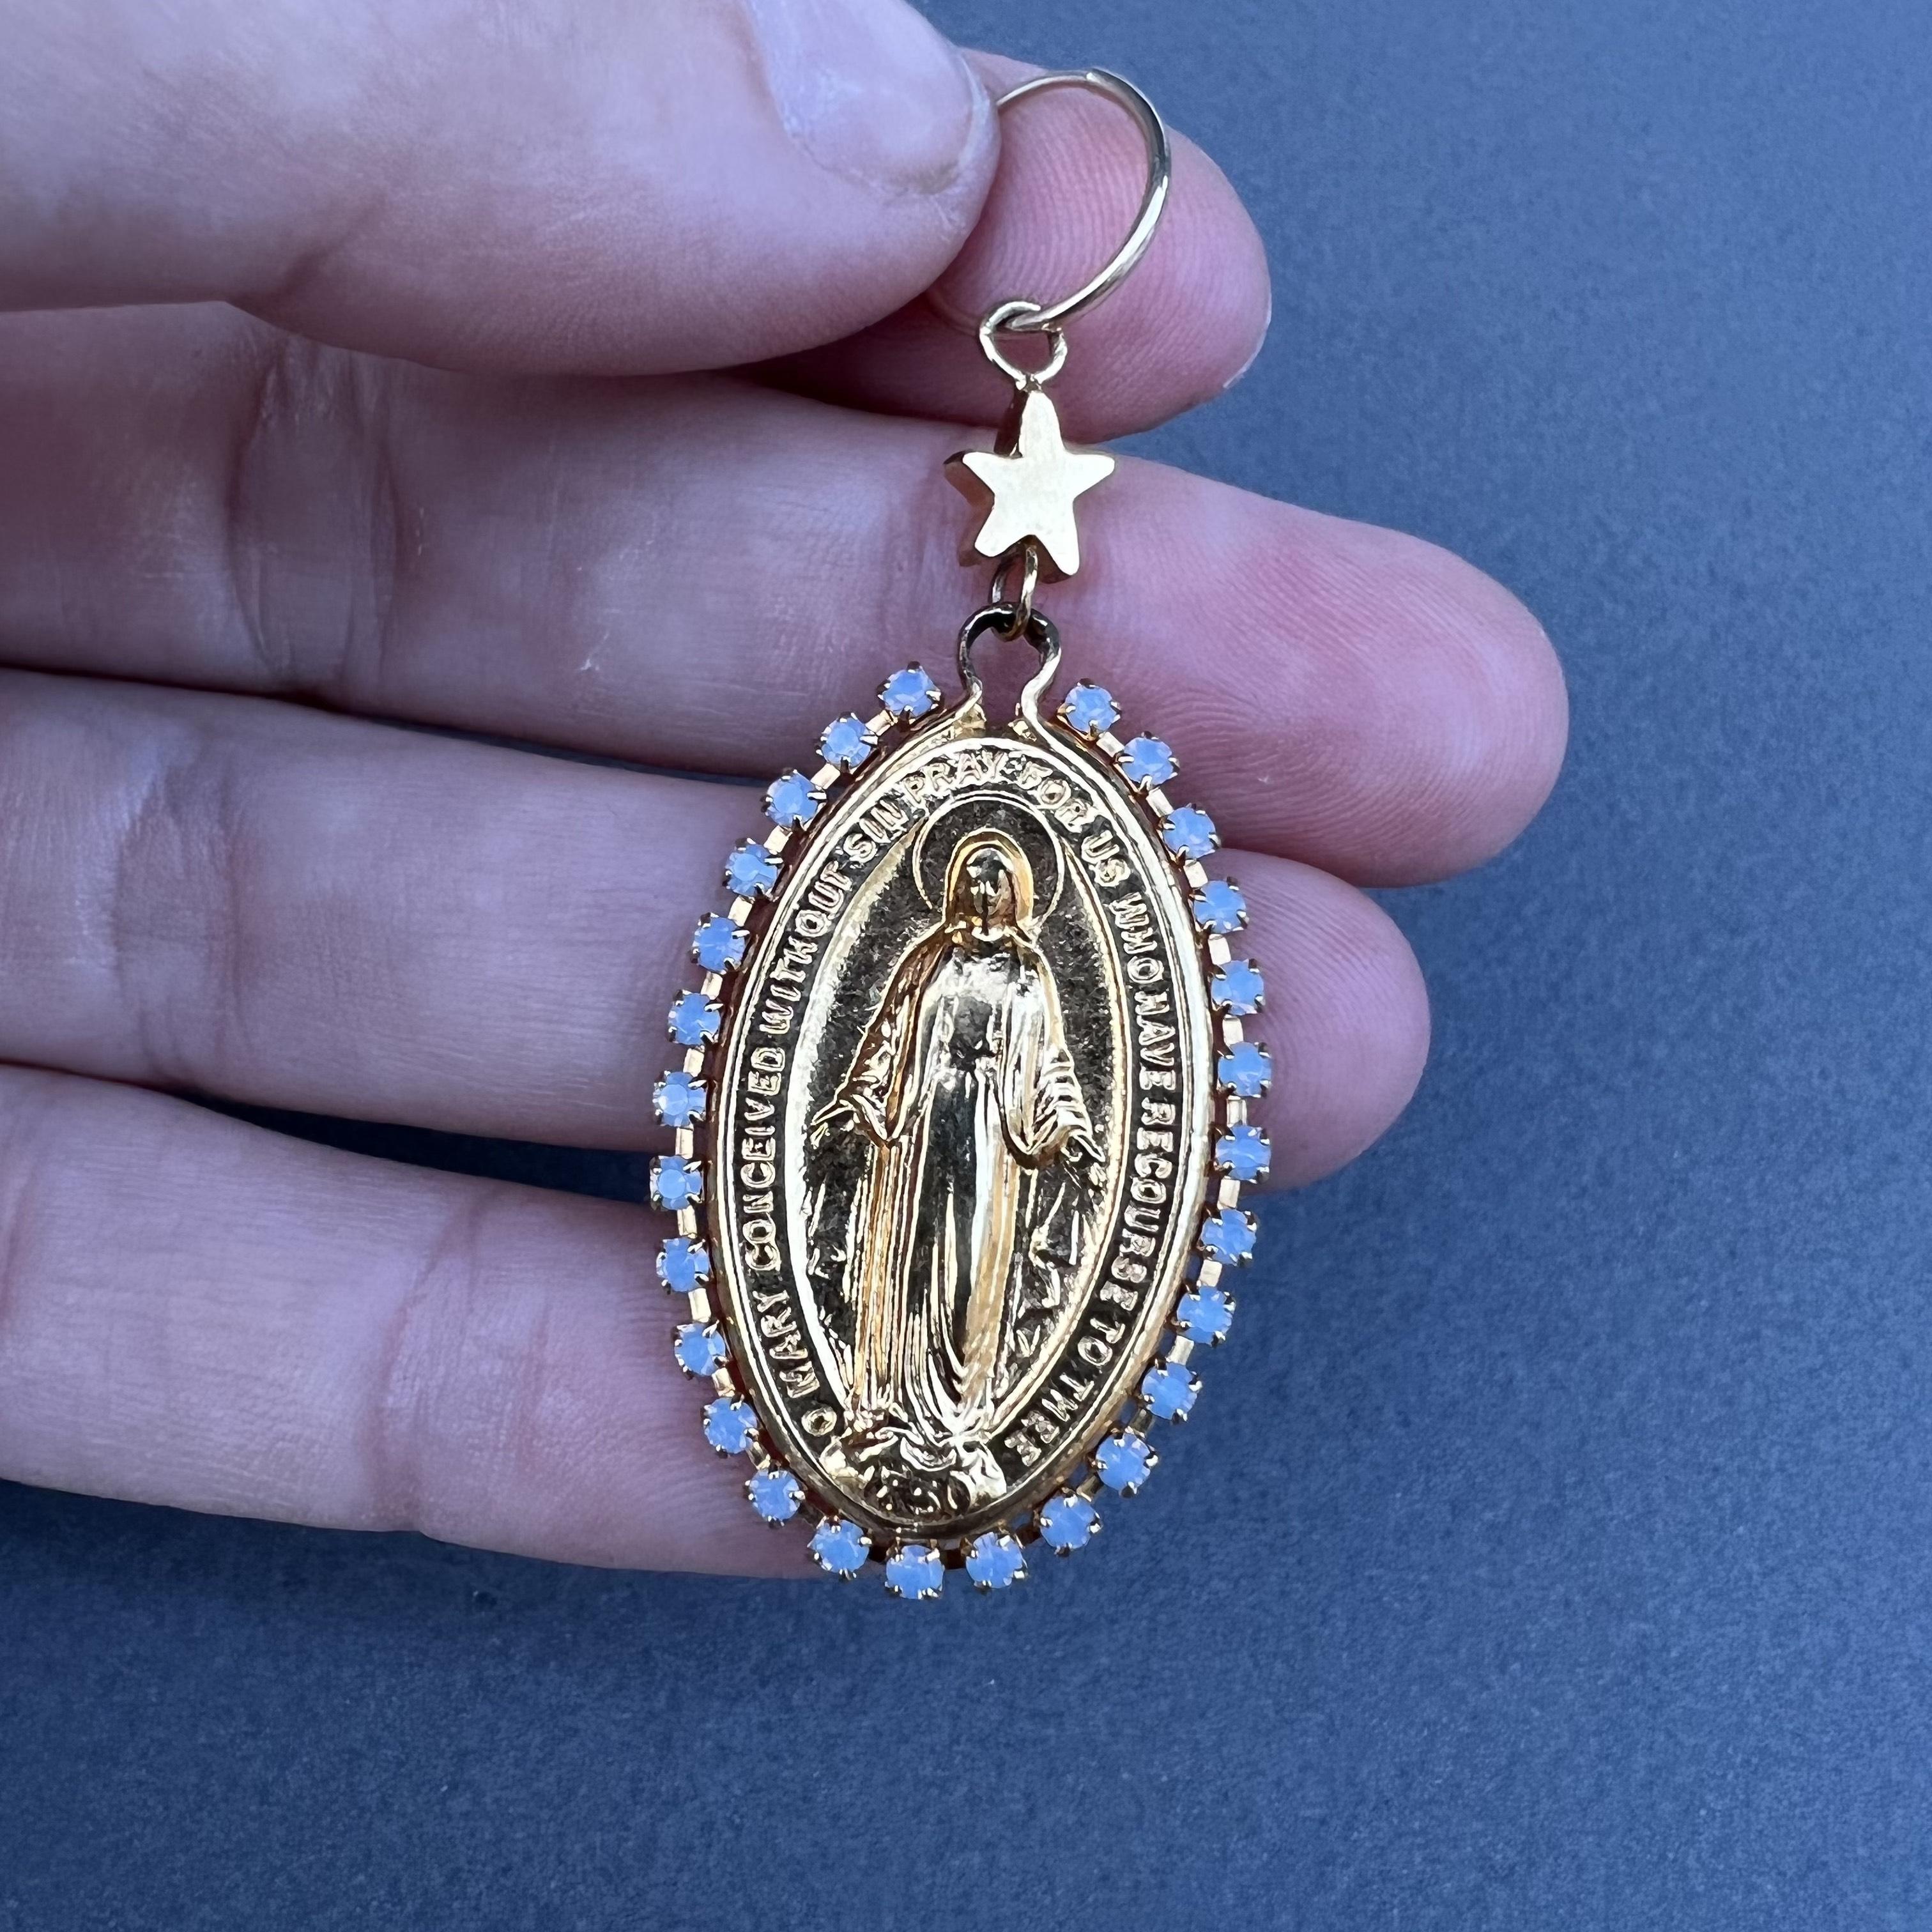 Virgin Mary Medal Earrings Rhinestone Light Blue J Dauphin In New Condition For Sale In Los Angeles, CA